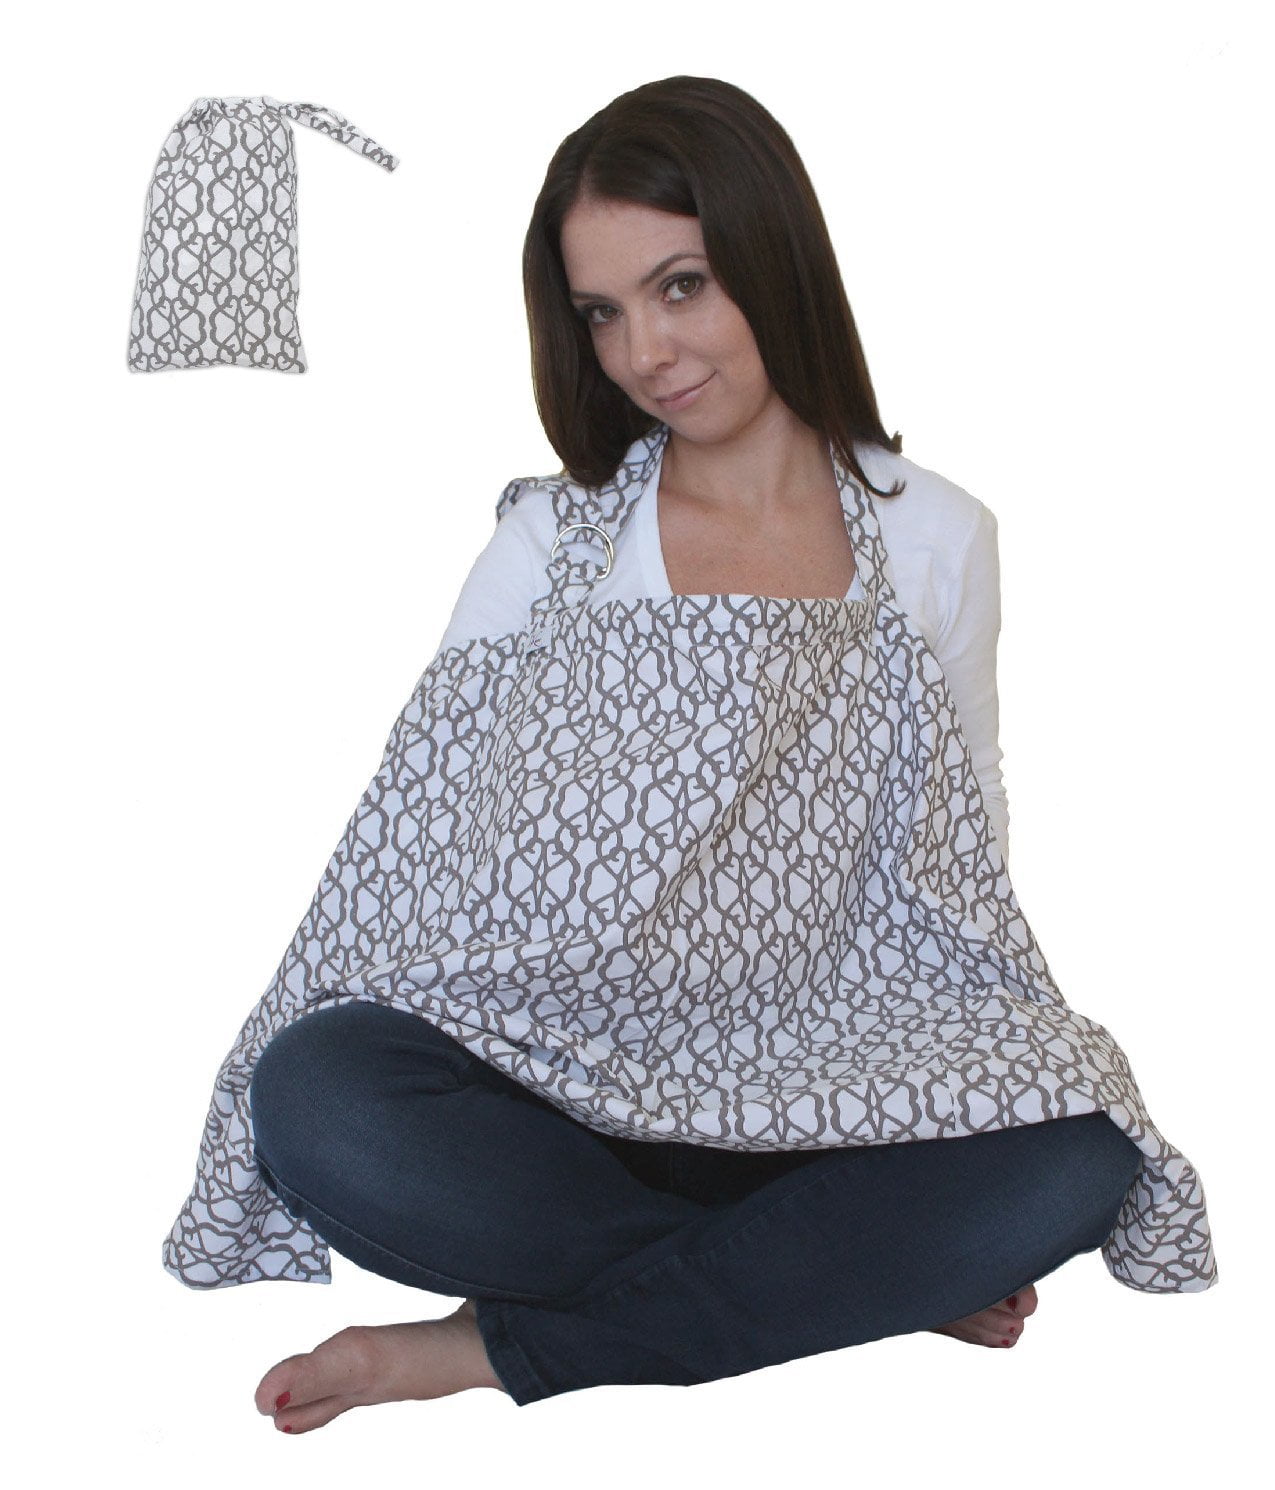 Adjustable Strap Nursing Breastfeeding Cover Privacy Apron Cover up Soft Cotton 